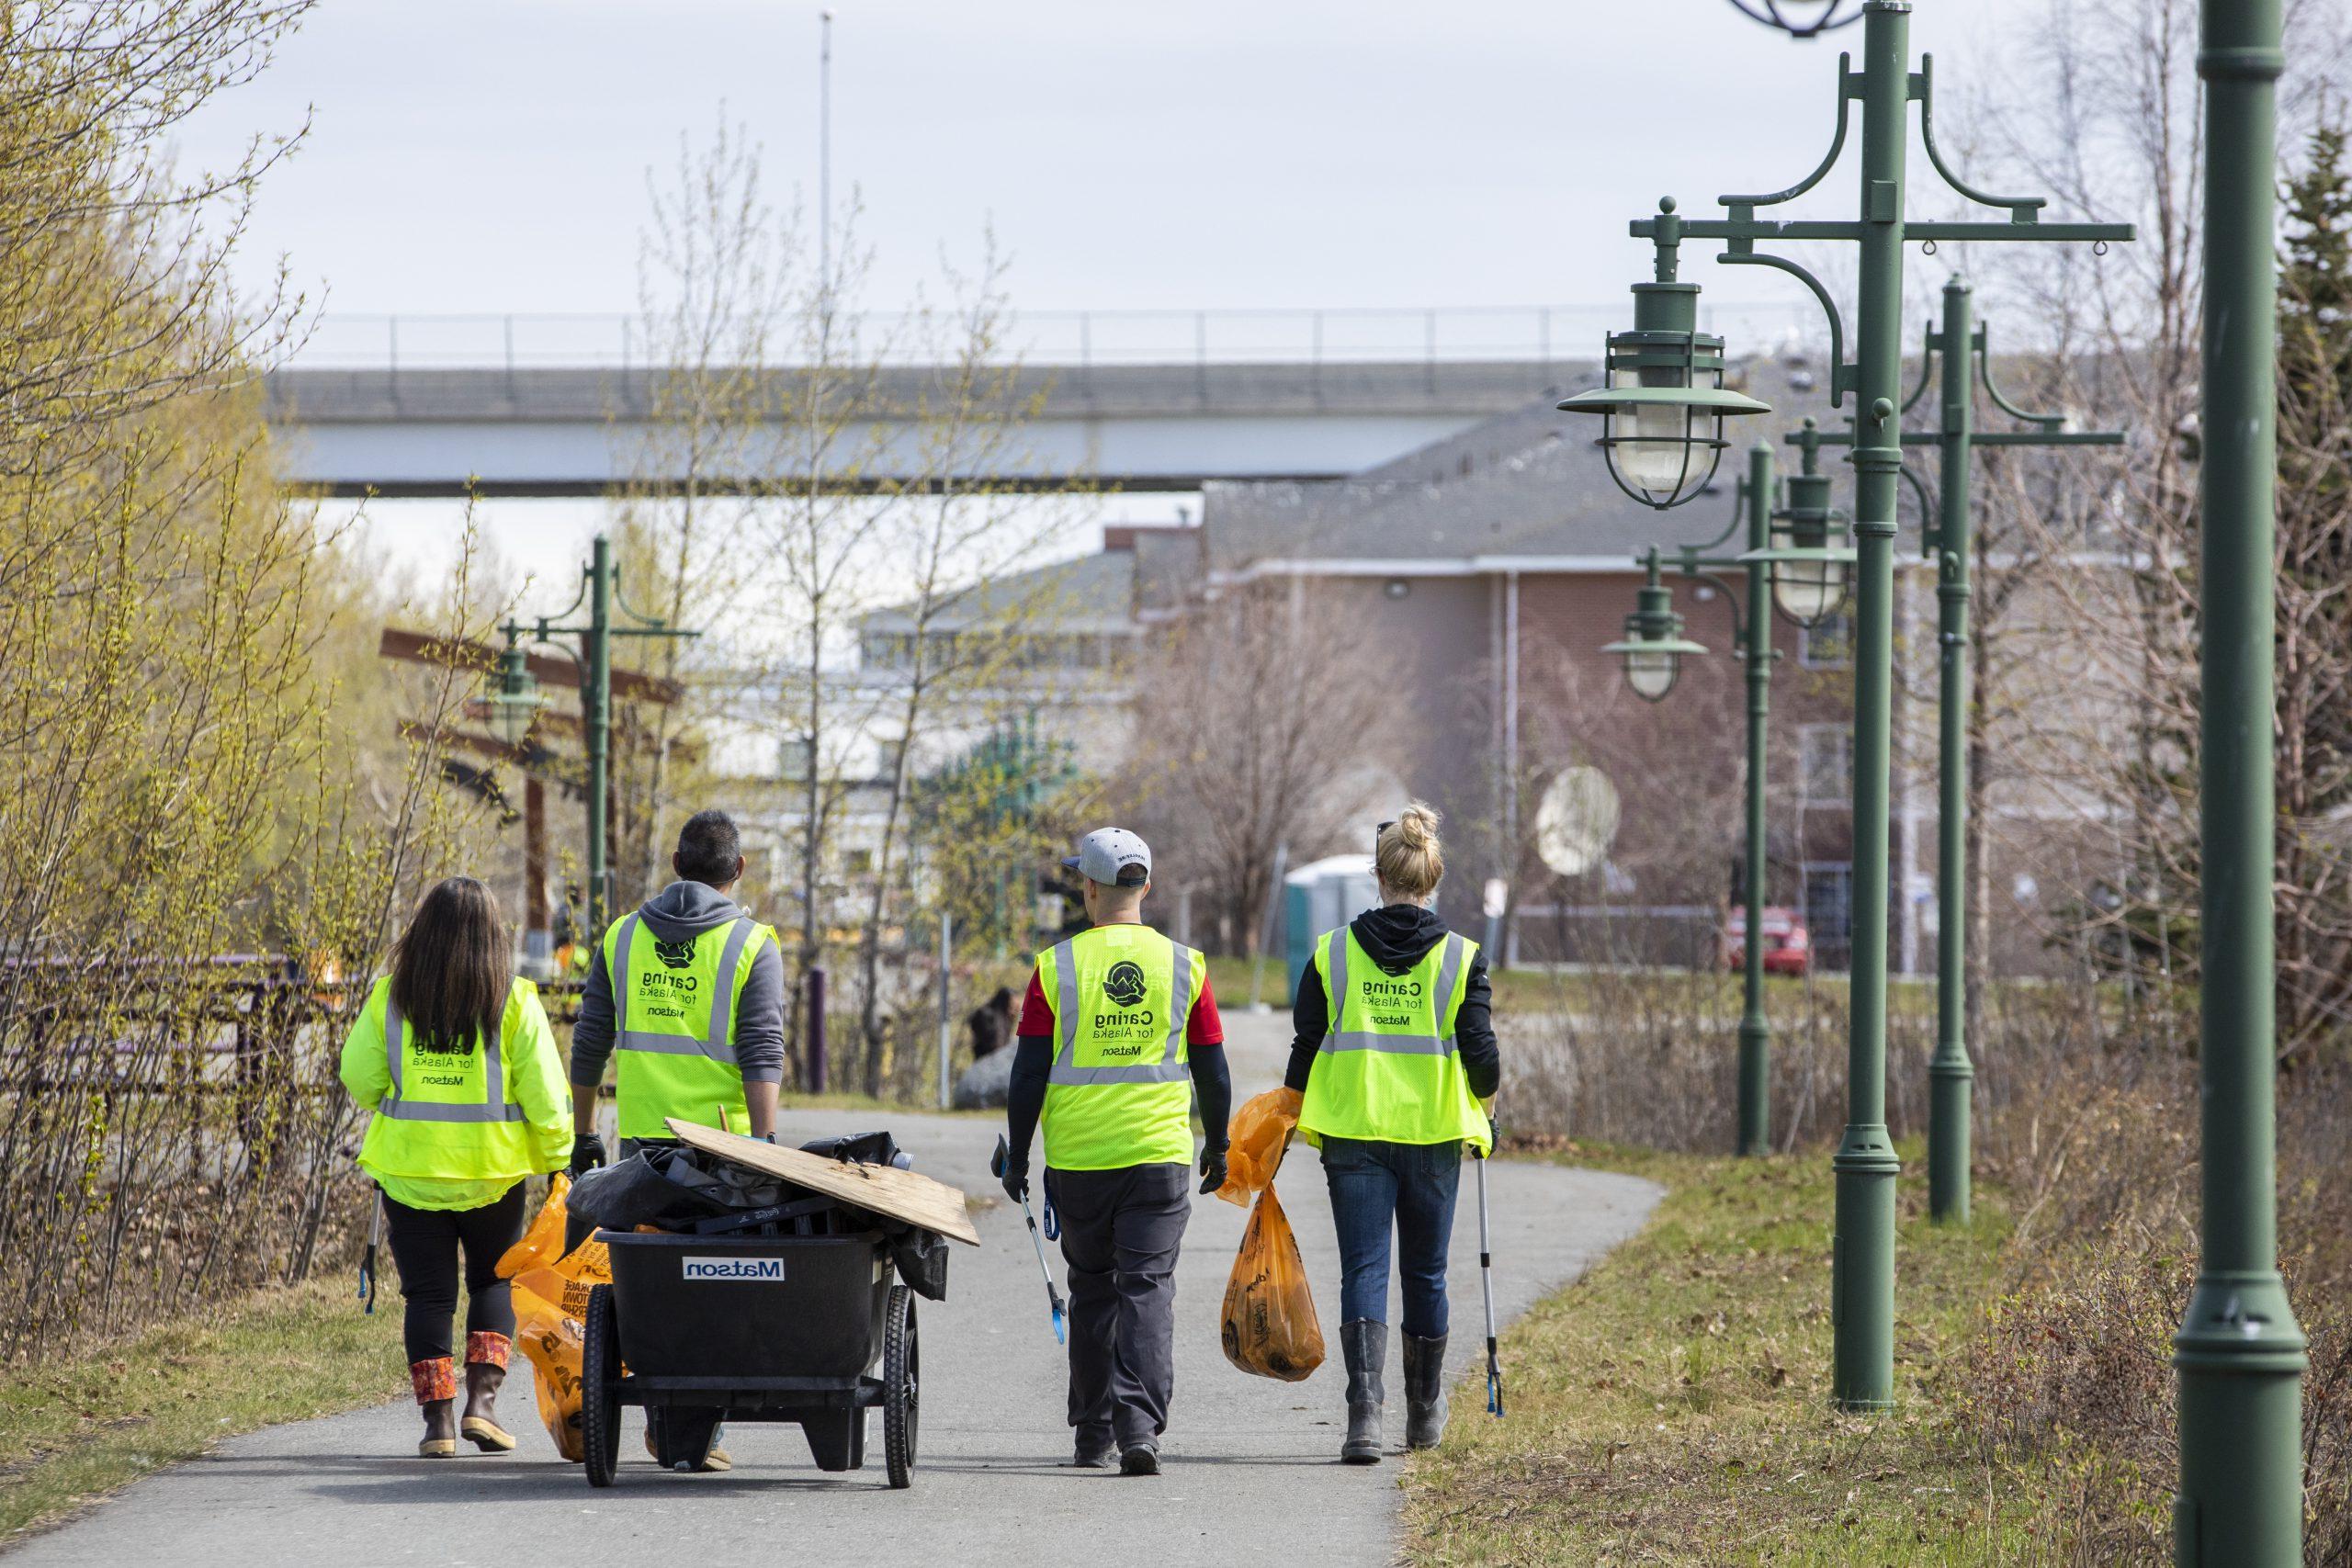 Volunteers wearing yellow safety vests walk along Ship Creek with a cart and orange bags full of trash.